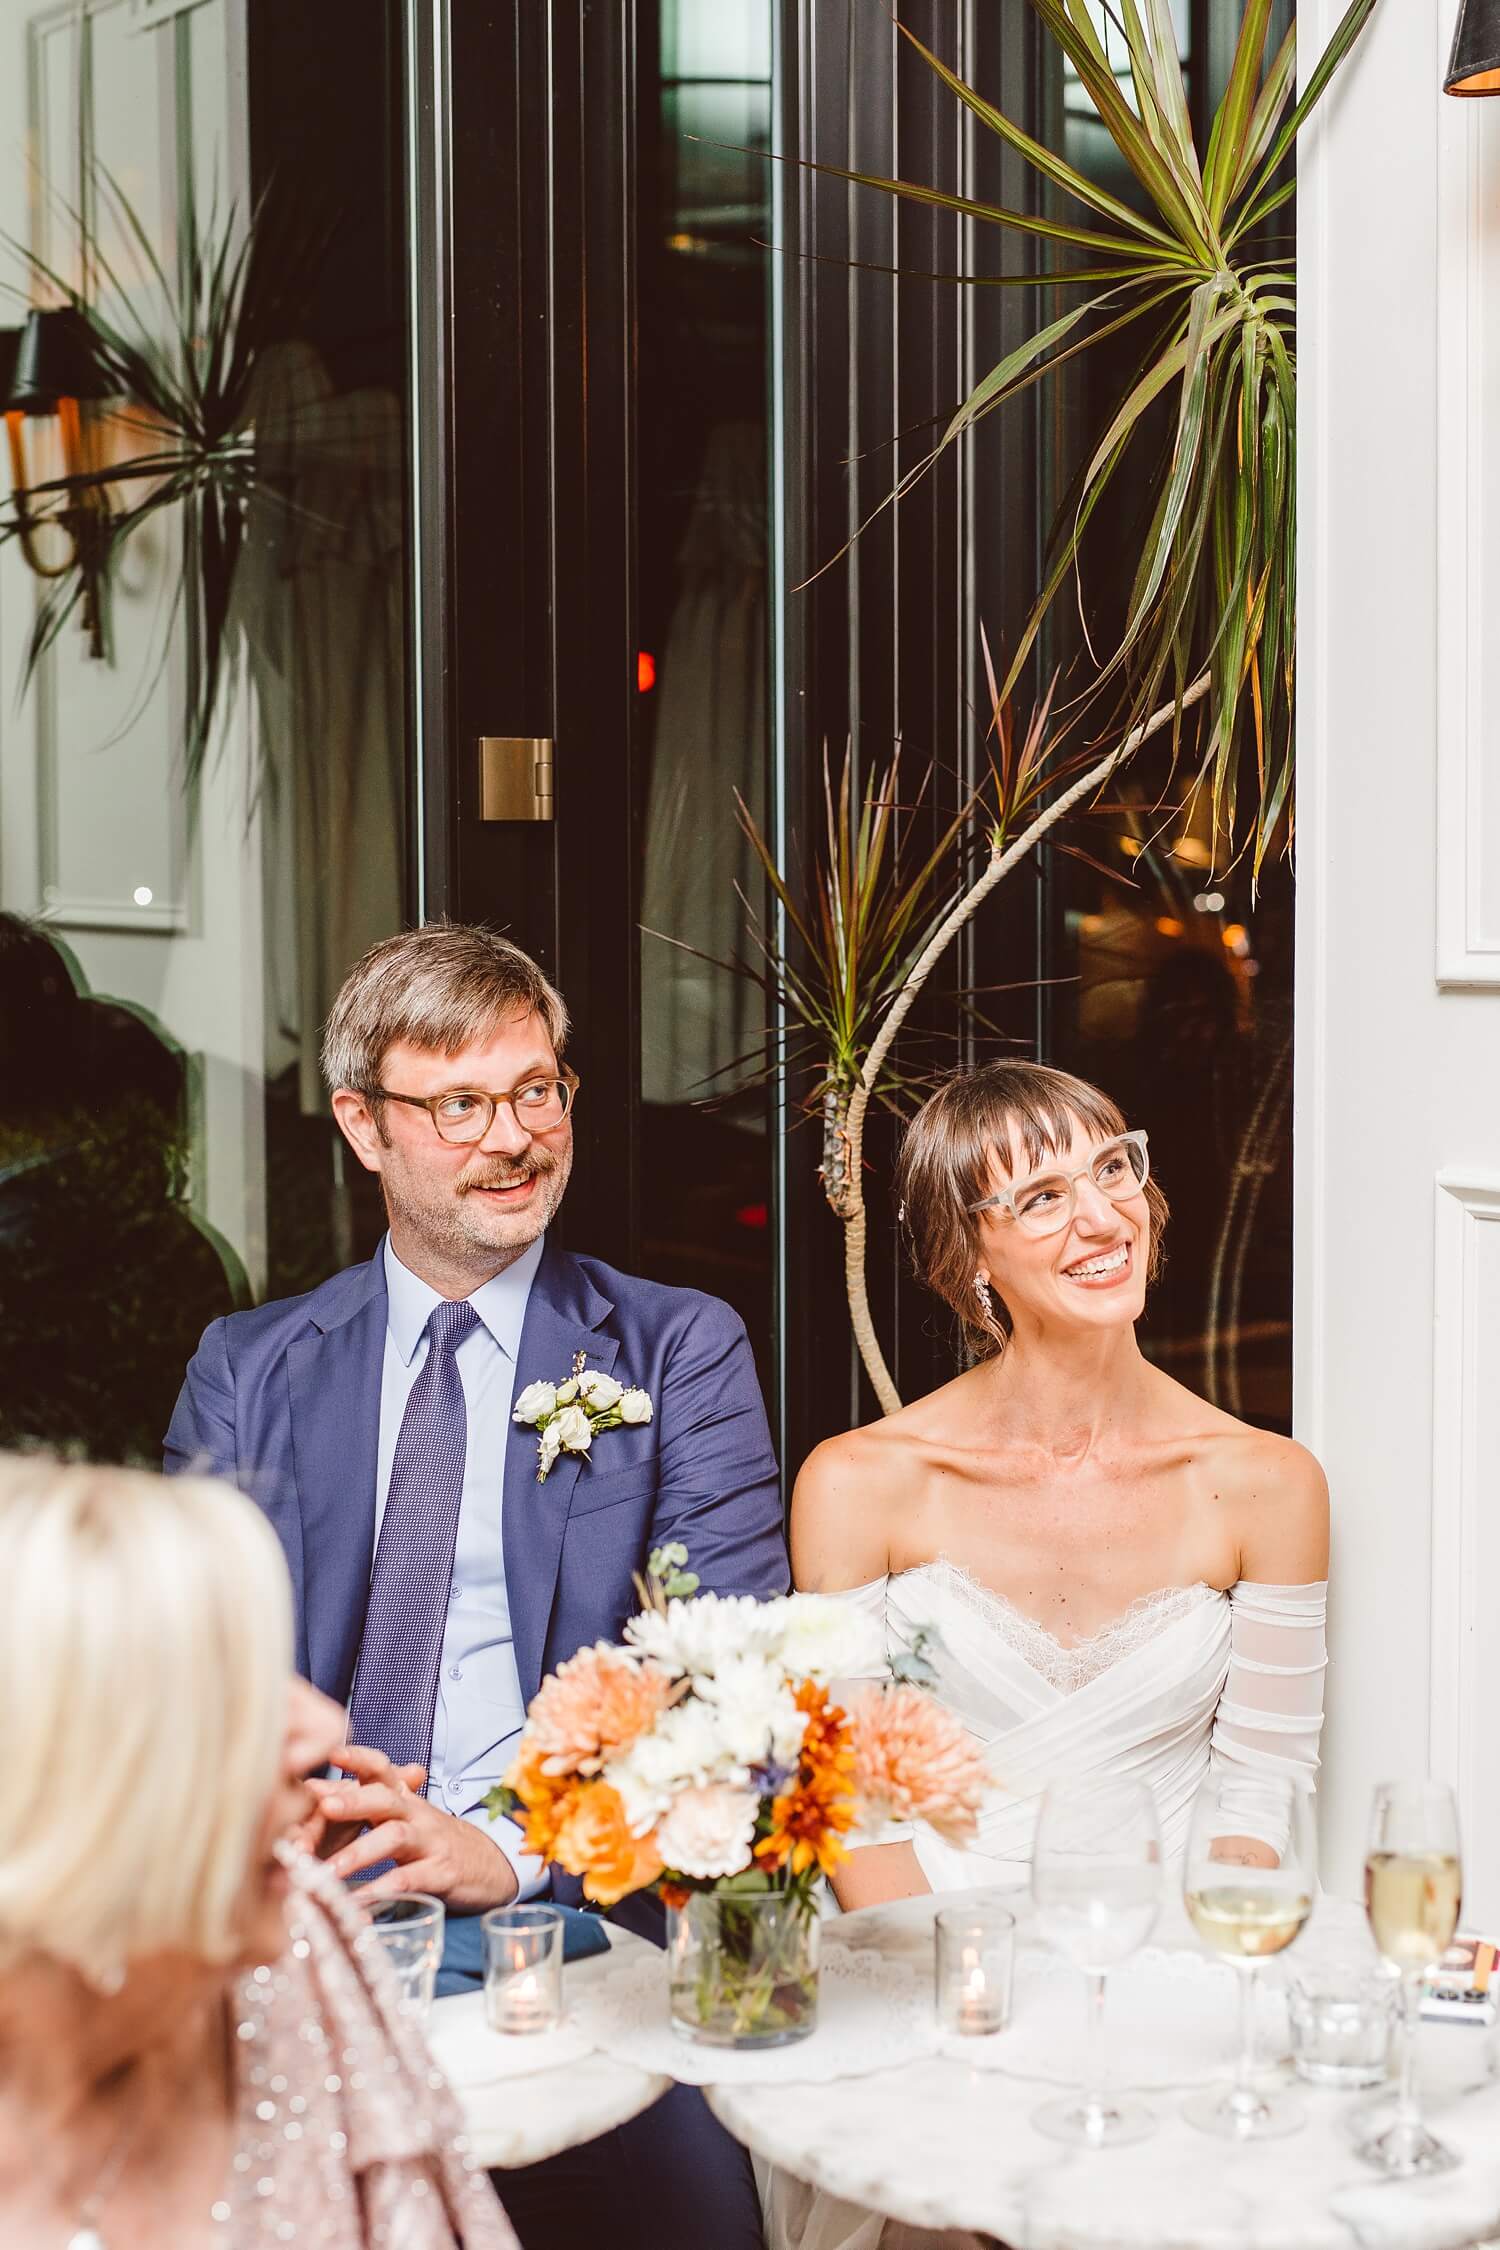 Couple smiling during wedding reception toasts | Brooke Michelle Photography